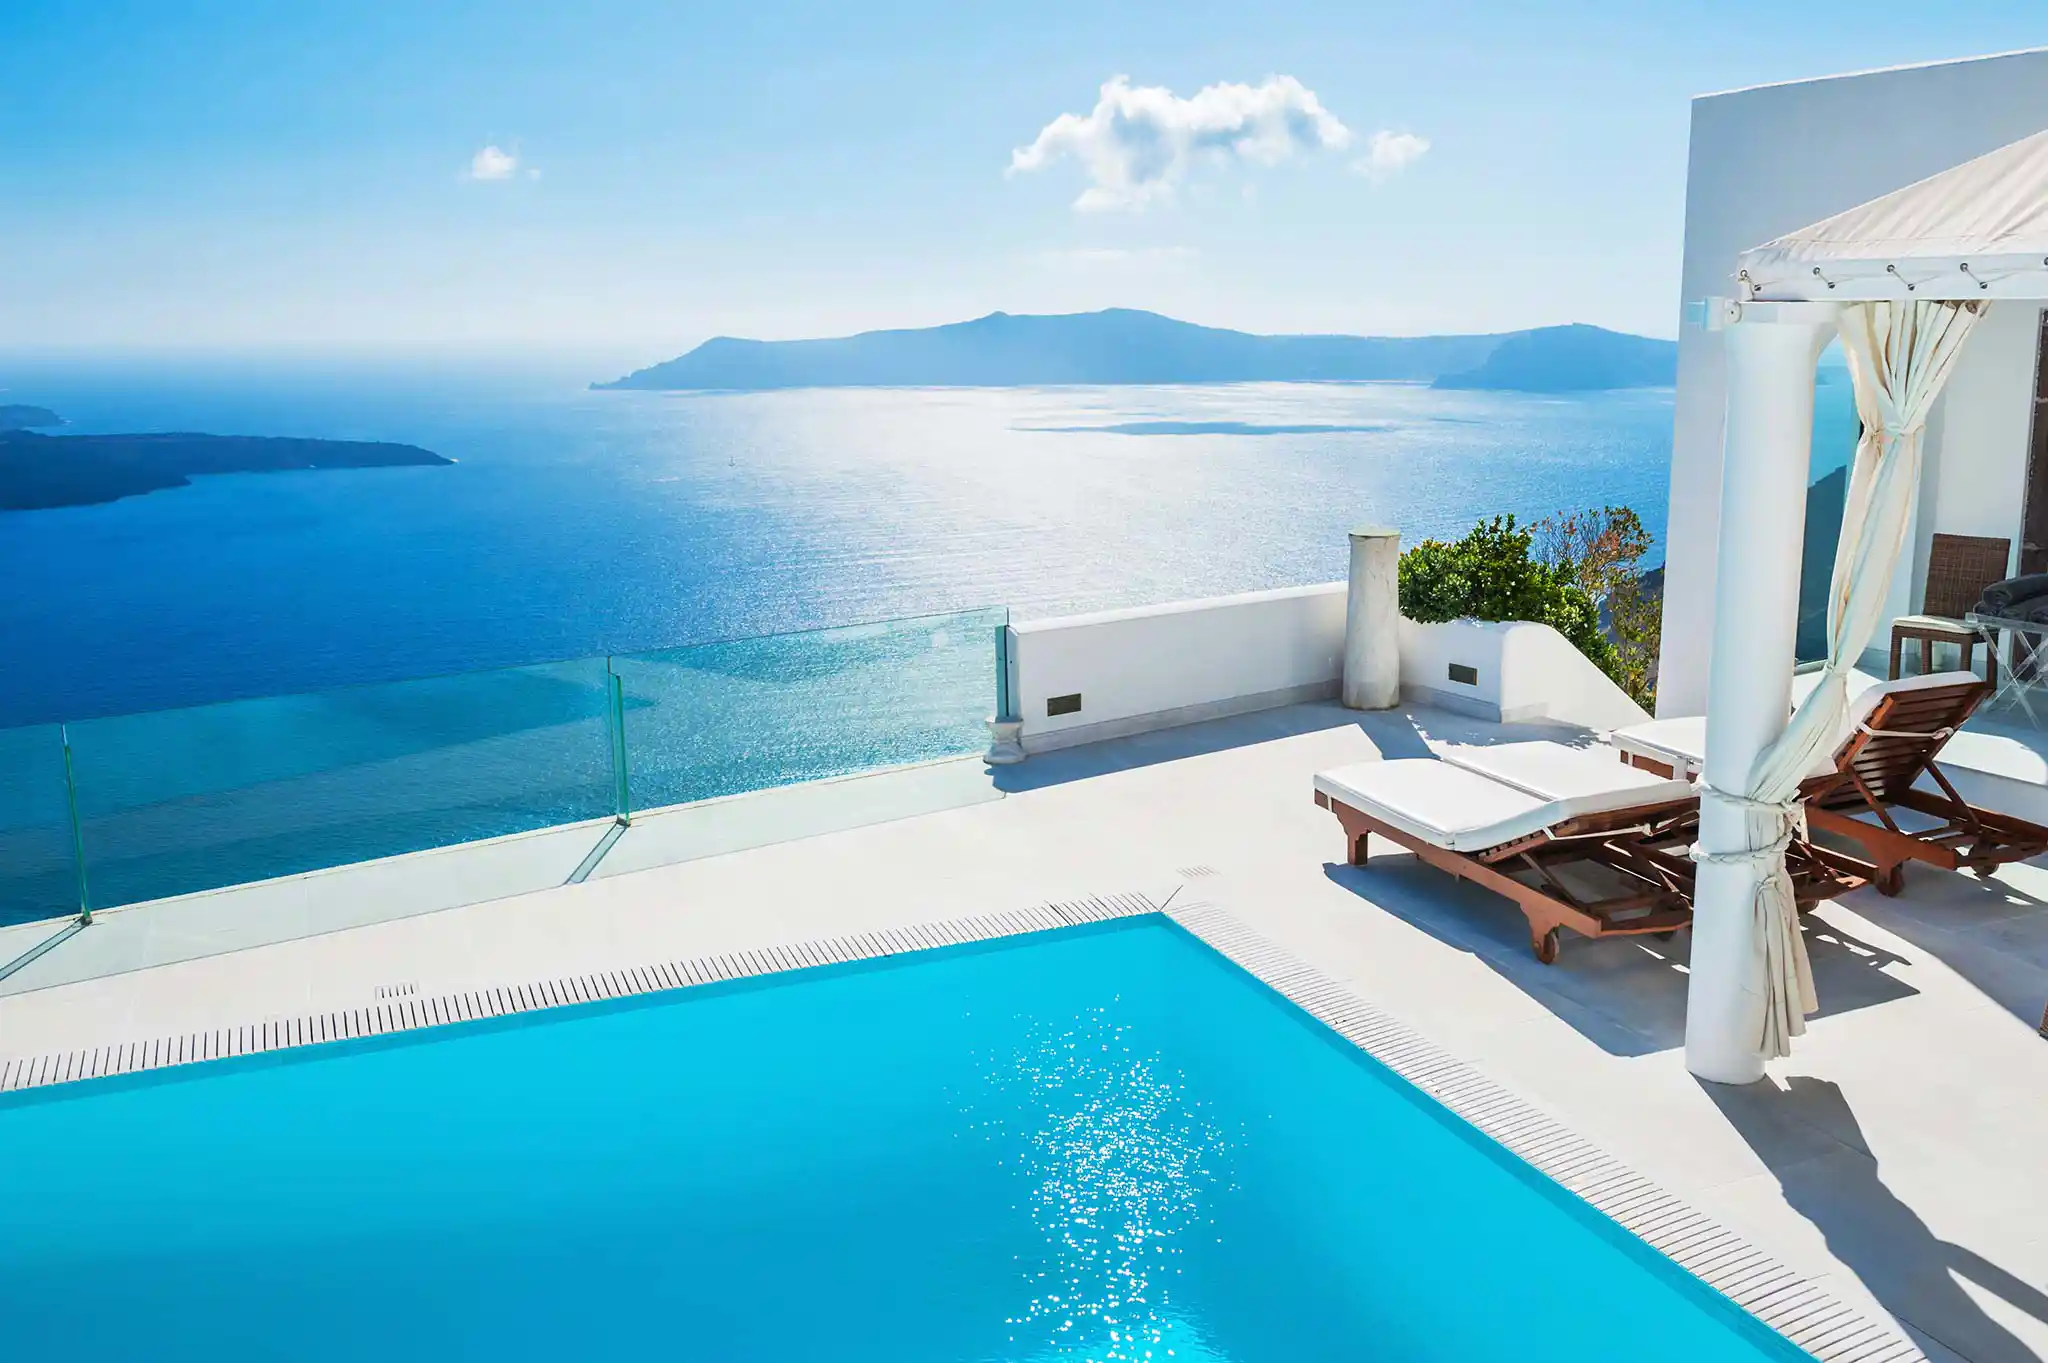 The world’s most luxurious islands